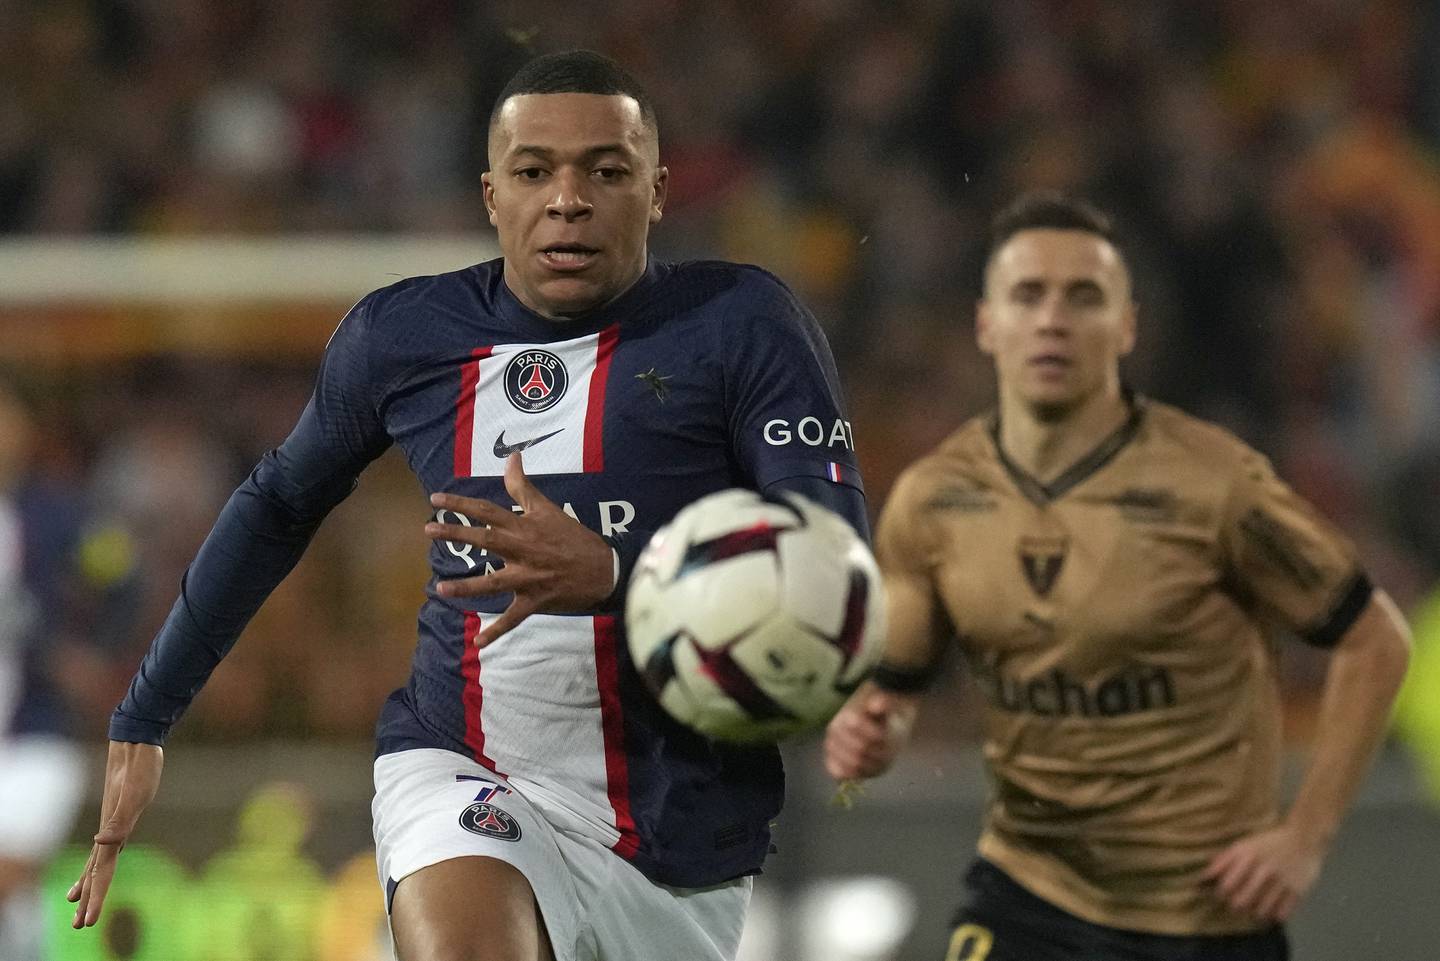 PSG's Kylian Mbappe races after the ball. AP Photo